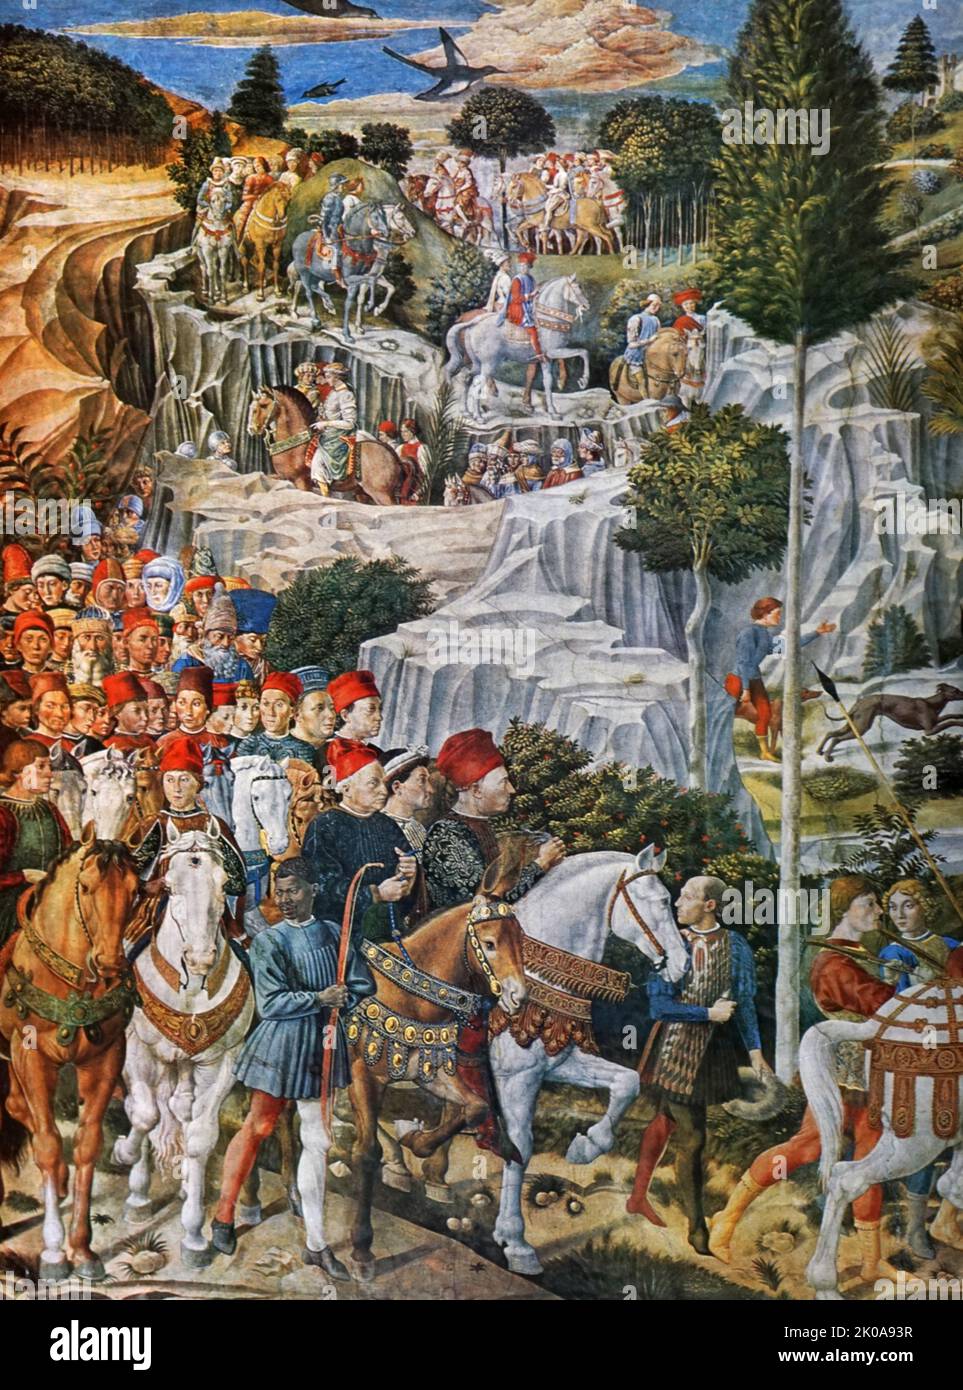 PDF) Gift Exchange at the Court of Cosimo I de' Medici, 1537-1574